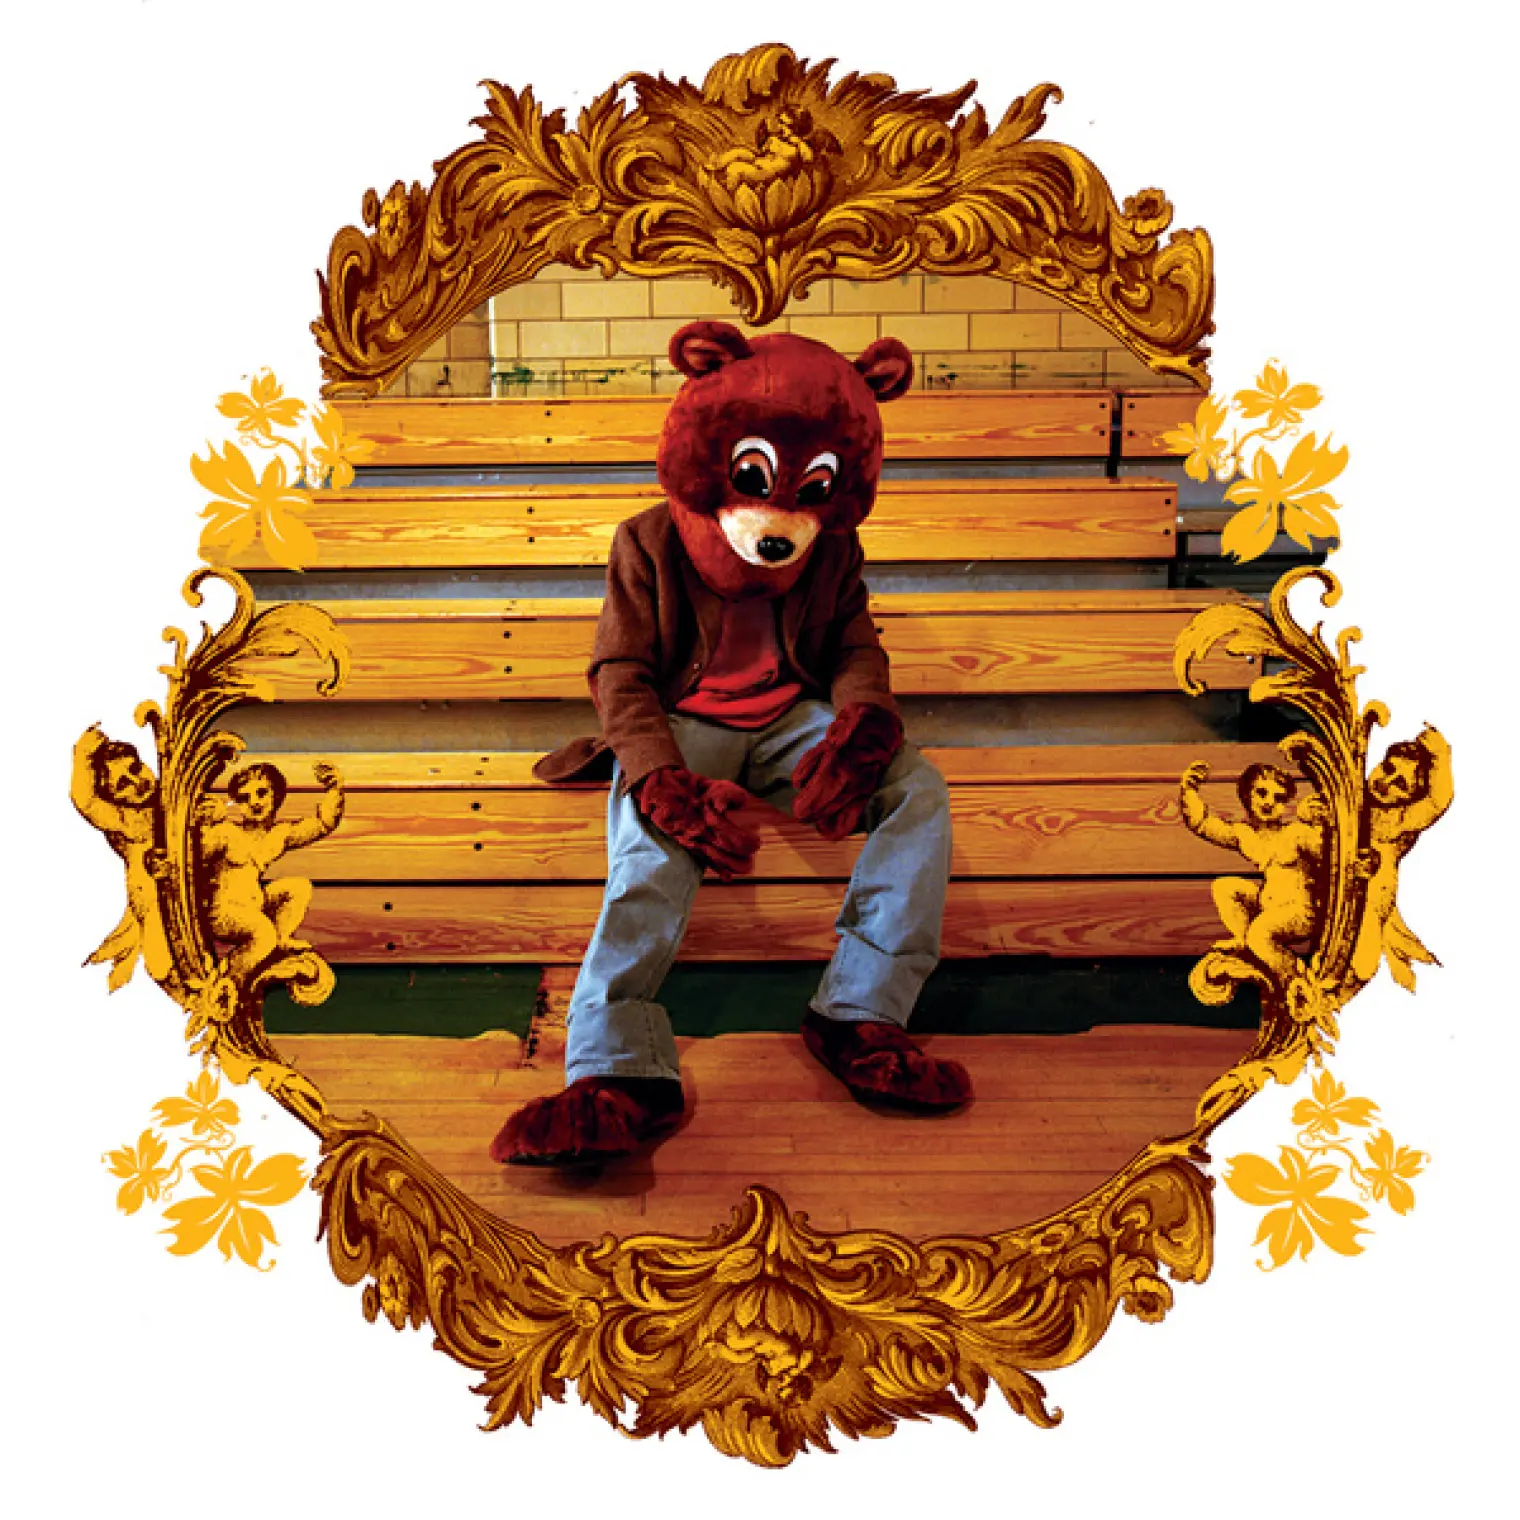 The College Dropout -  Kanye West 